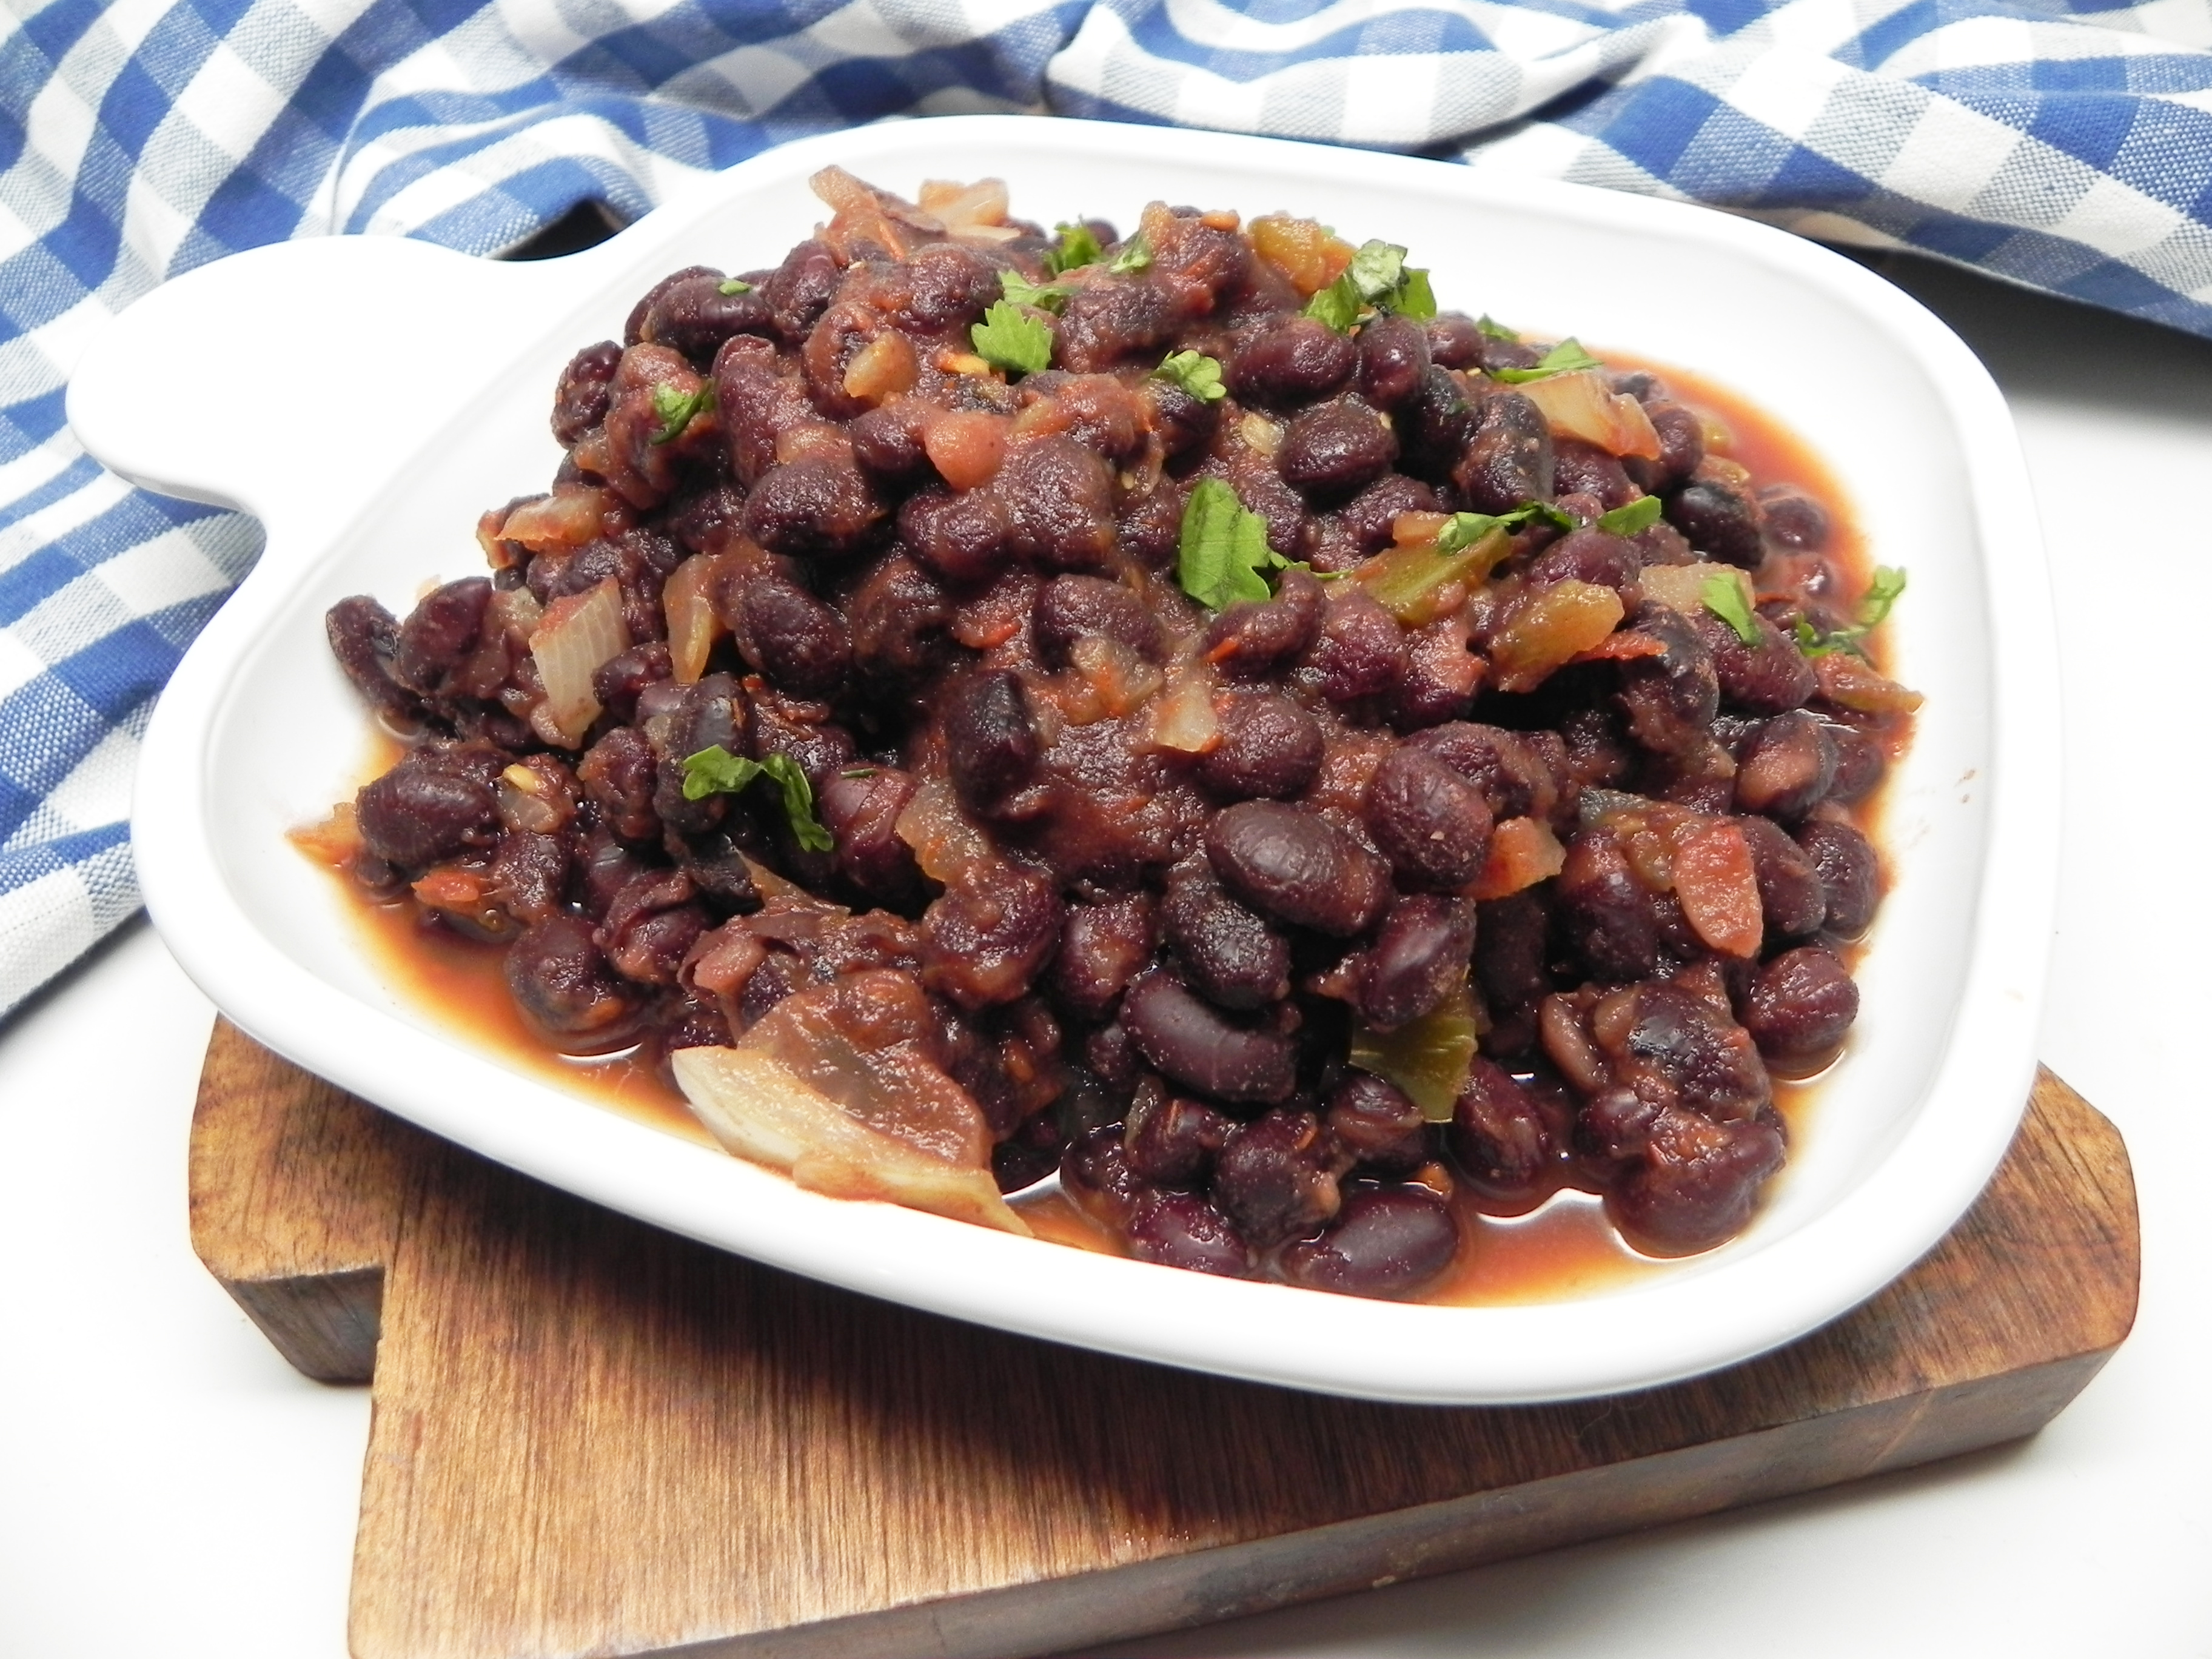 Vegan Spiced Black Beans for a Crowd